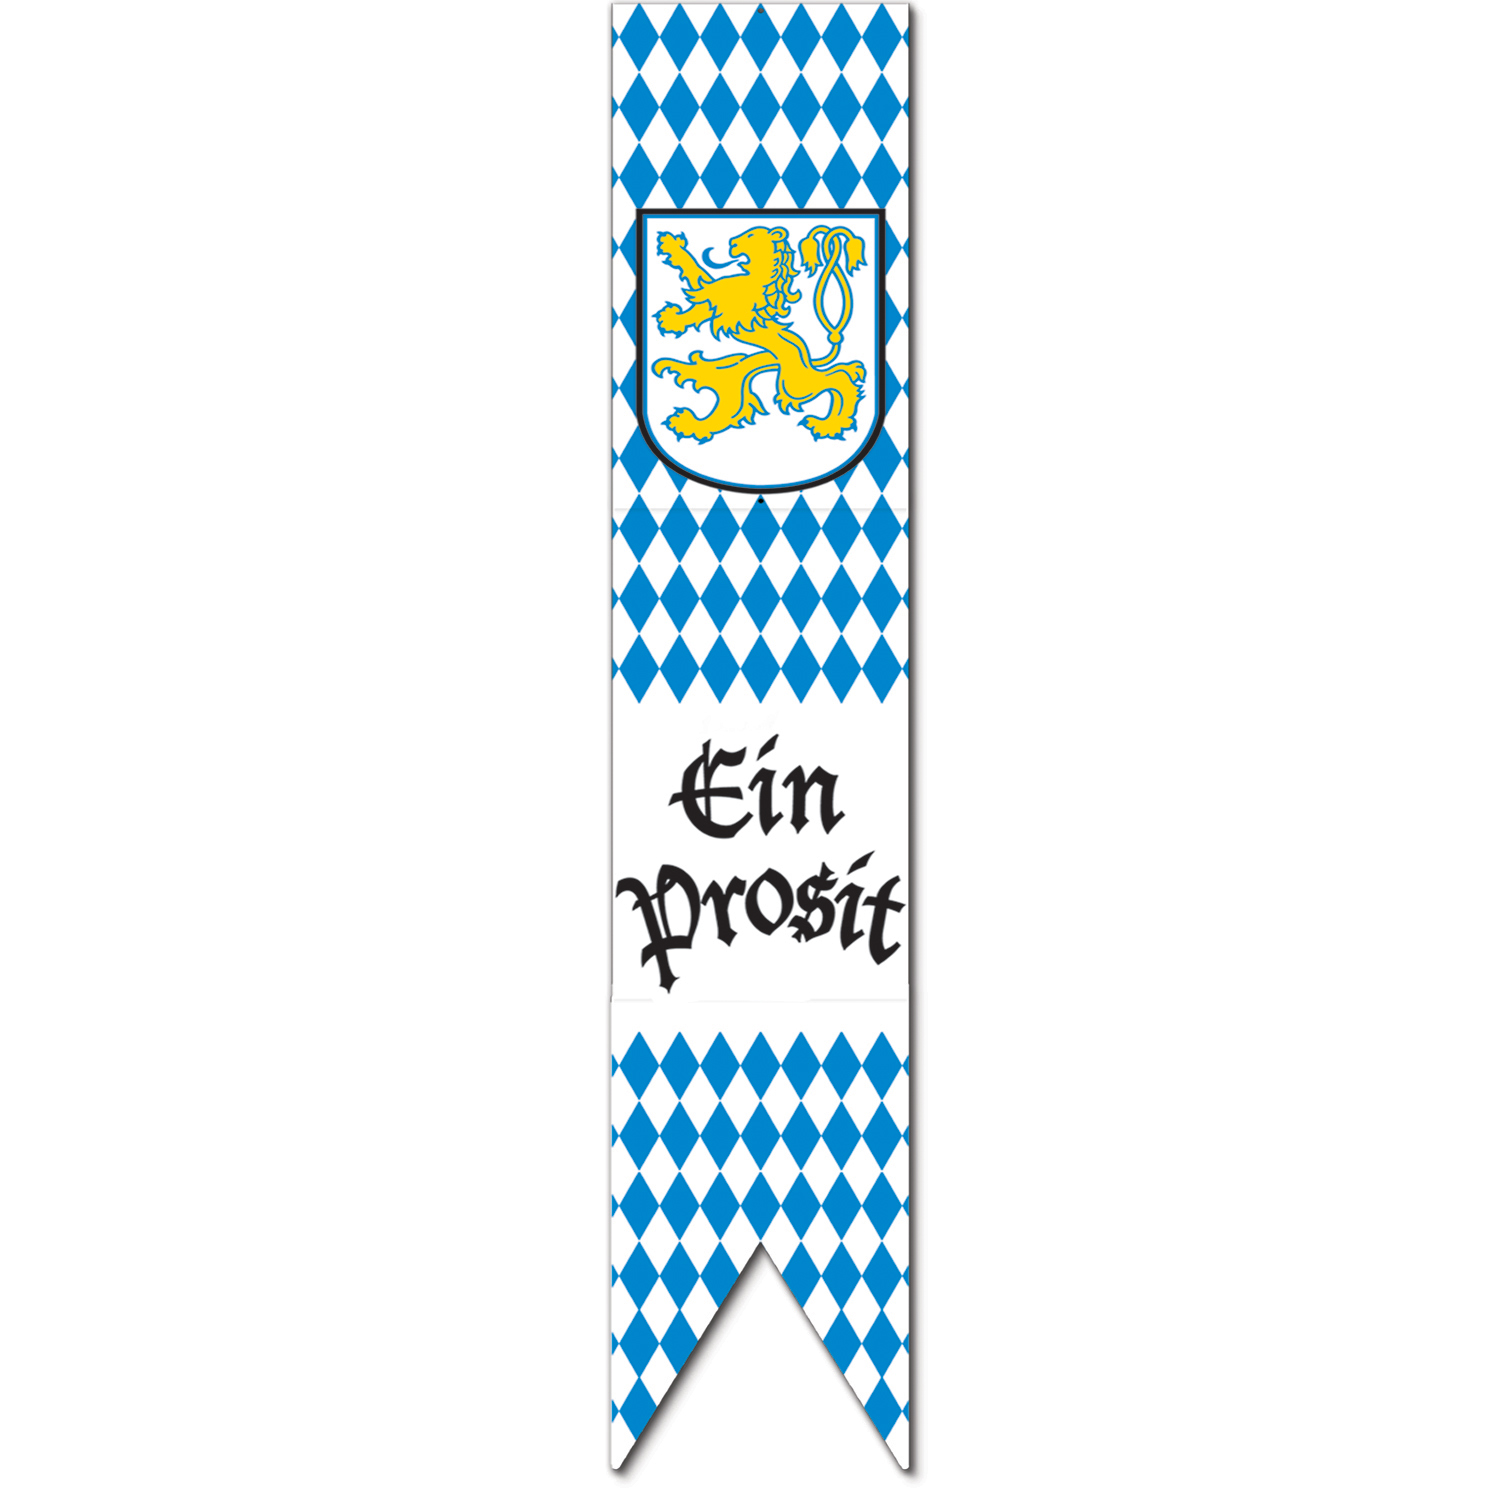 12 Pieces of Jointed Oktoberfest Pull-Down Cutout